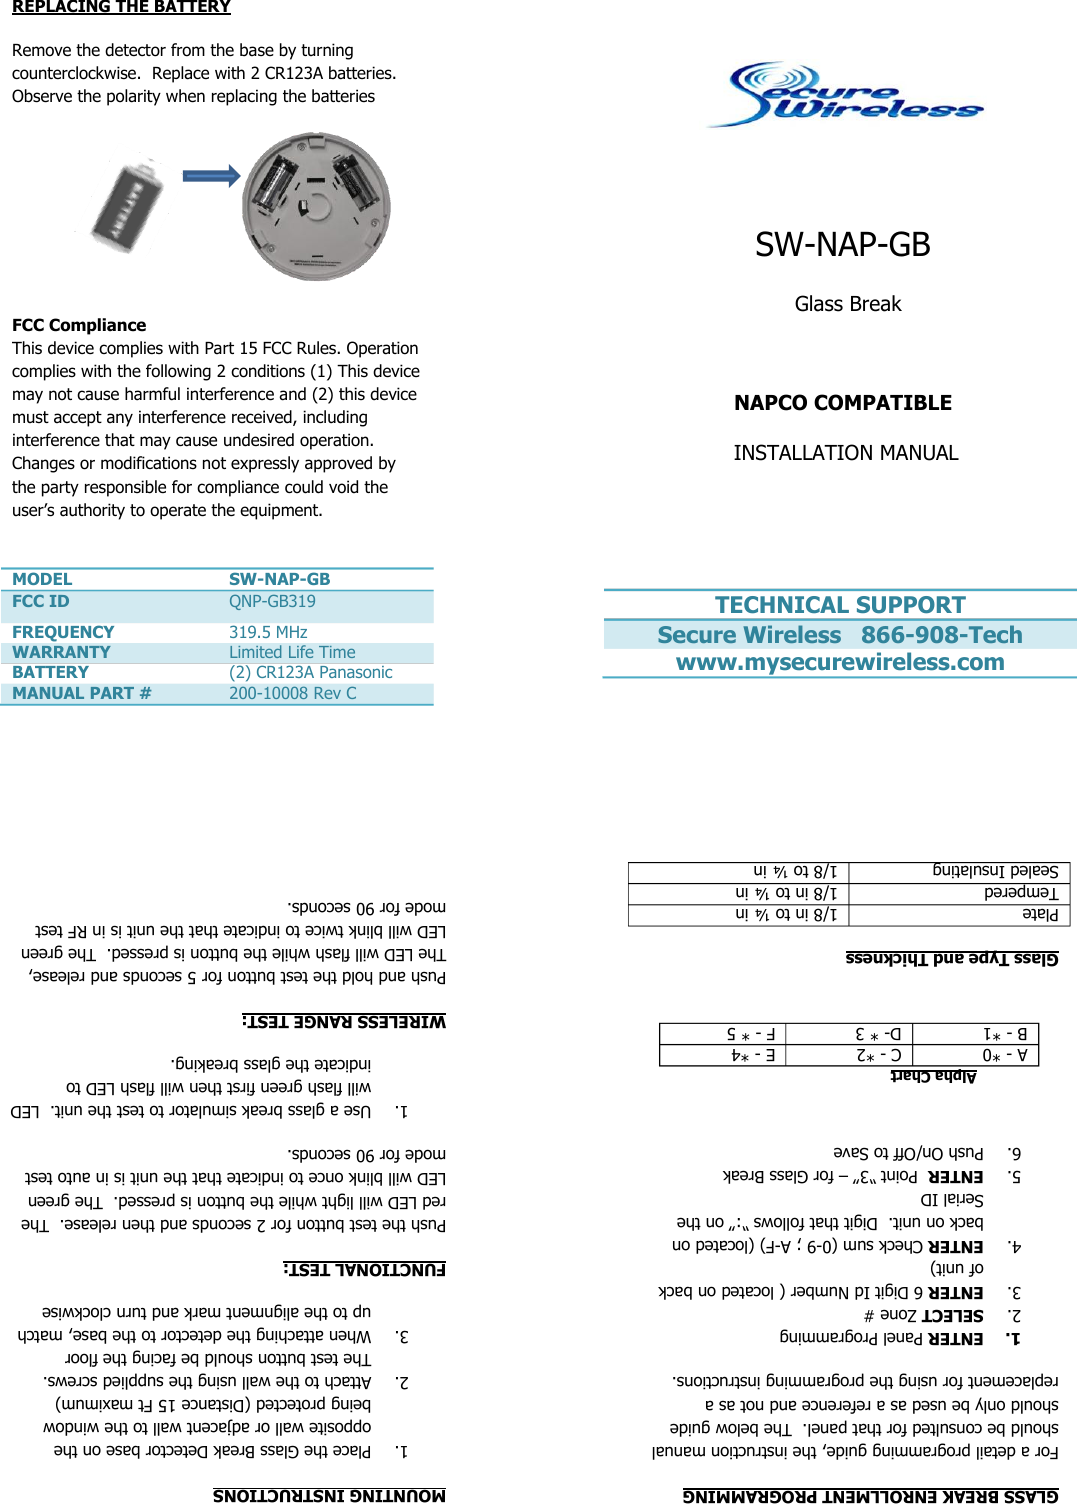                                            SW-NAP-GB  Glass Break  NAPCO COMPATIBLE  INSTALLATION MANUAL   TECHNICAL SUPPORT Secure Wireless   866-908-Tech www.mysecurewireless.com  GLASS BREAK ENROLLMENT PROGRAMMING For a detail programming guide, the instruction manual should be consulted for that panel.  The below guide should only be used as a reference and not as a replacement for using the programming instructions. 1. ENTER Panel Programming 2. SELECT Zone # 3. ENTER 6 Digit Id Number ( located on back of unit) 4. ENTER Check sum (0-9 ; A-F) (located on back on unit.  Digit that follows “:” on the Serial ID 5. ENTER  Point “3” – for Glass Break 6. Push On/Off to Save    Alpha Chart A - *0 C - *2 E - *4 B - *1 D- * 3 F - * 5  Glass Type and Thickness Plate 1/8 in to ¼ in Tempered 1/8 in to ¼ in Sealed Insulating 1/8 to ¼ in  REPLACING THE BATTERY Remove the detector from the base by turning counterclockwise.  Replace with 2 CR123A batteries.  Observe the polarity when replacing the batteries    FCC Compliance This device complies with Part 15 FCC Rules. Operation complies with the following 2 conditions (1) This device may not cause harmful interference and (2) this device must accept any interference received, including interference that may cause undesired operation. Changes or modifications not expressly approved by the party responsible for compliance could void the user’s authority to operate the equipment.    MODEL SW-NAP-GB FCC ID QNP-GB319 FREQUENCY 319.5 MHz WARRANTY Limited Life Time BATTERY (2) CR123A Panasonic MANUAL PART # 200-10008 Rev C  MOUNTING INSTRUCTIONS 1. Place the Glass Break Detector base on the opposite wall or adjacent wall to the window being protected (Distance 15 Ft maximum) 2. Attach to the wall using the supplied screws.  The test button should be facing the floor 3. When attaching the detector to the base, match up to the alignment mark and turn clockwise  FUNCTIONAL TEST: Push the test button for 2 seconds and then release.  The red LED will light while the button is pressed.  The green LED will blink once to indicate that the unit is in auto test mode for 90 seconds. 1. Use a glass break simulator to test the unit.  LED will flash green first then will flash LED to indicate the glass breaking. WIRELESS RANGE TEST: Push and hold the test button for 5 seconds and release,  The LED will flash while the button is pressed.  The green LED will blink twice to indicate that the unit is in RF test mode for 90 seconds.   